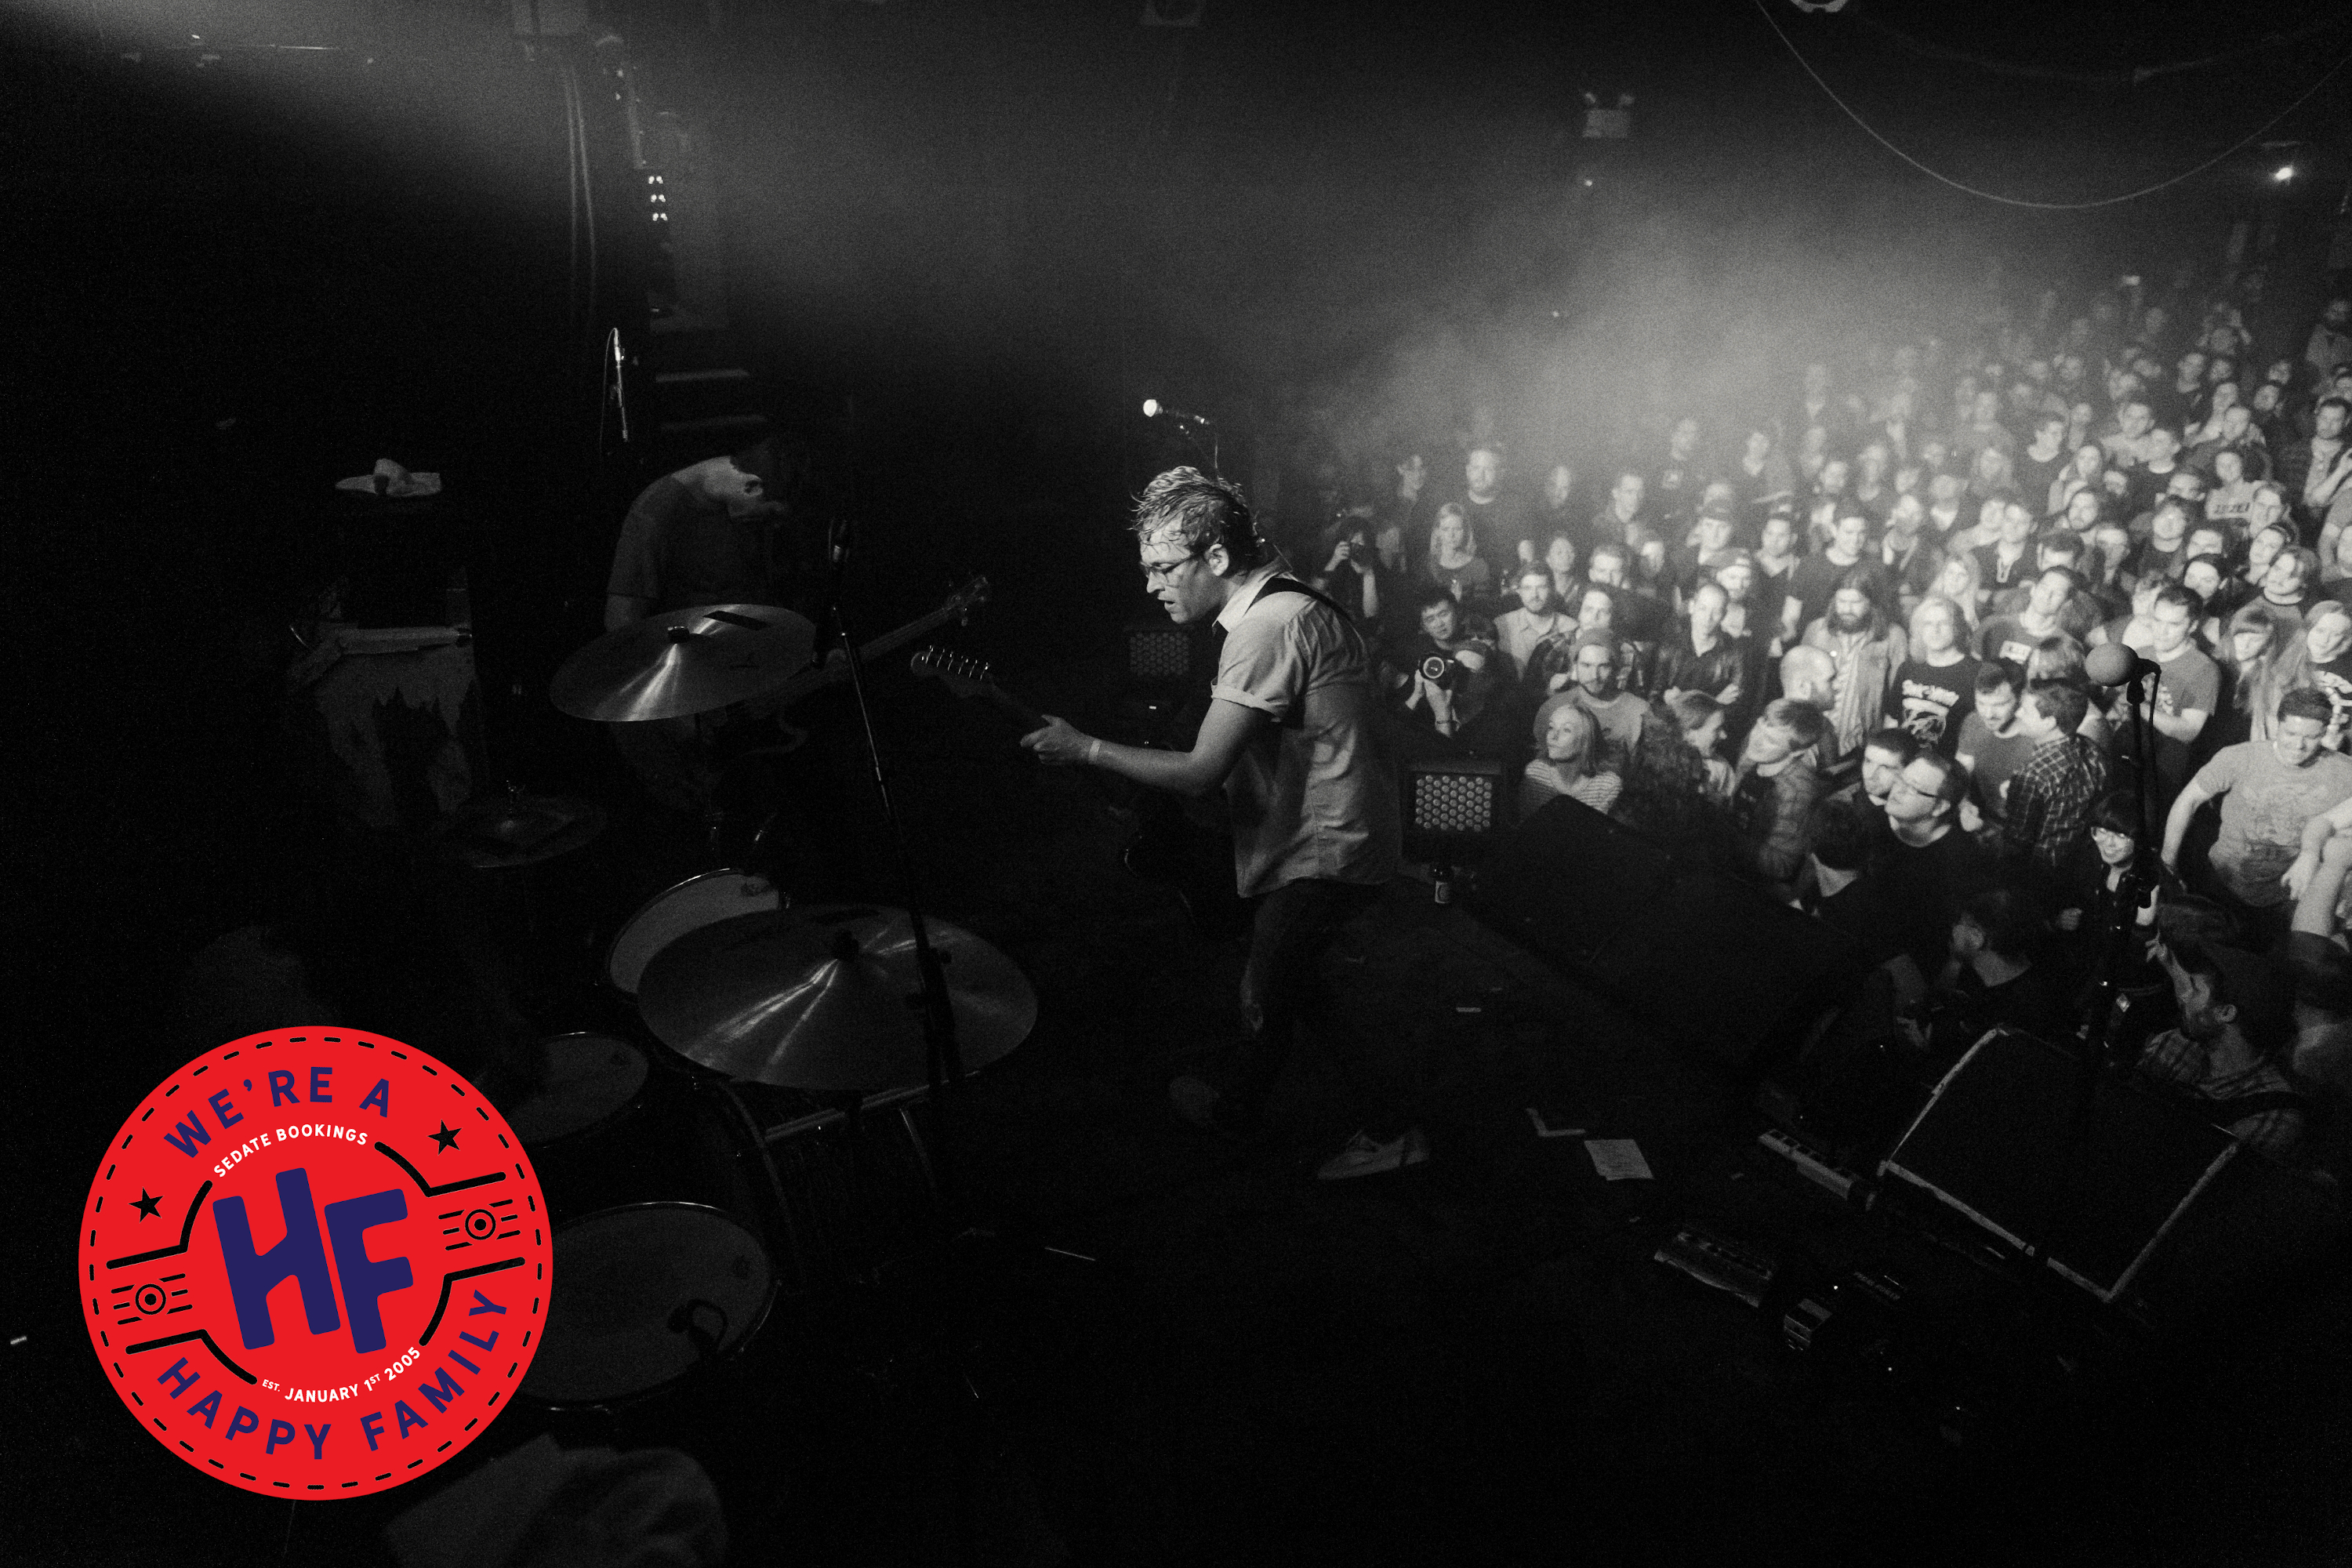 [We're A Happy Family] See METZ live from the Opera House: get your tickets now!